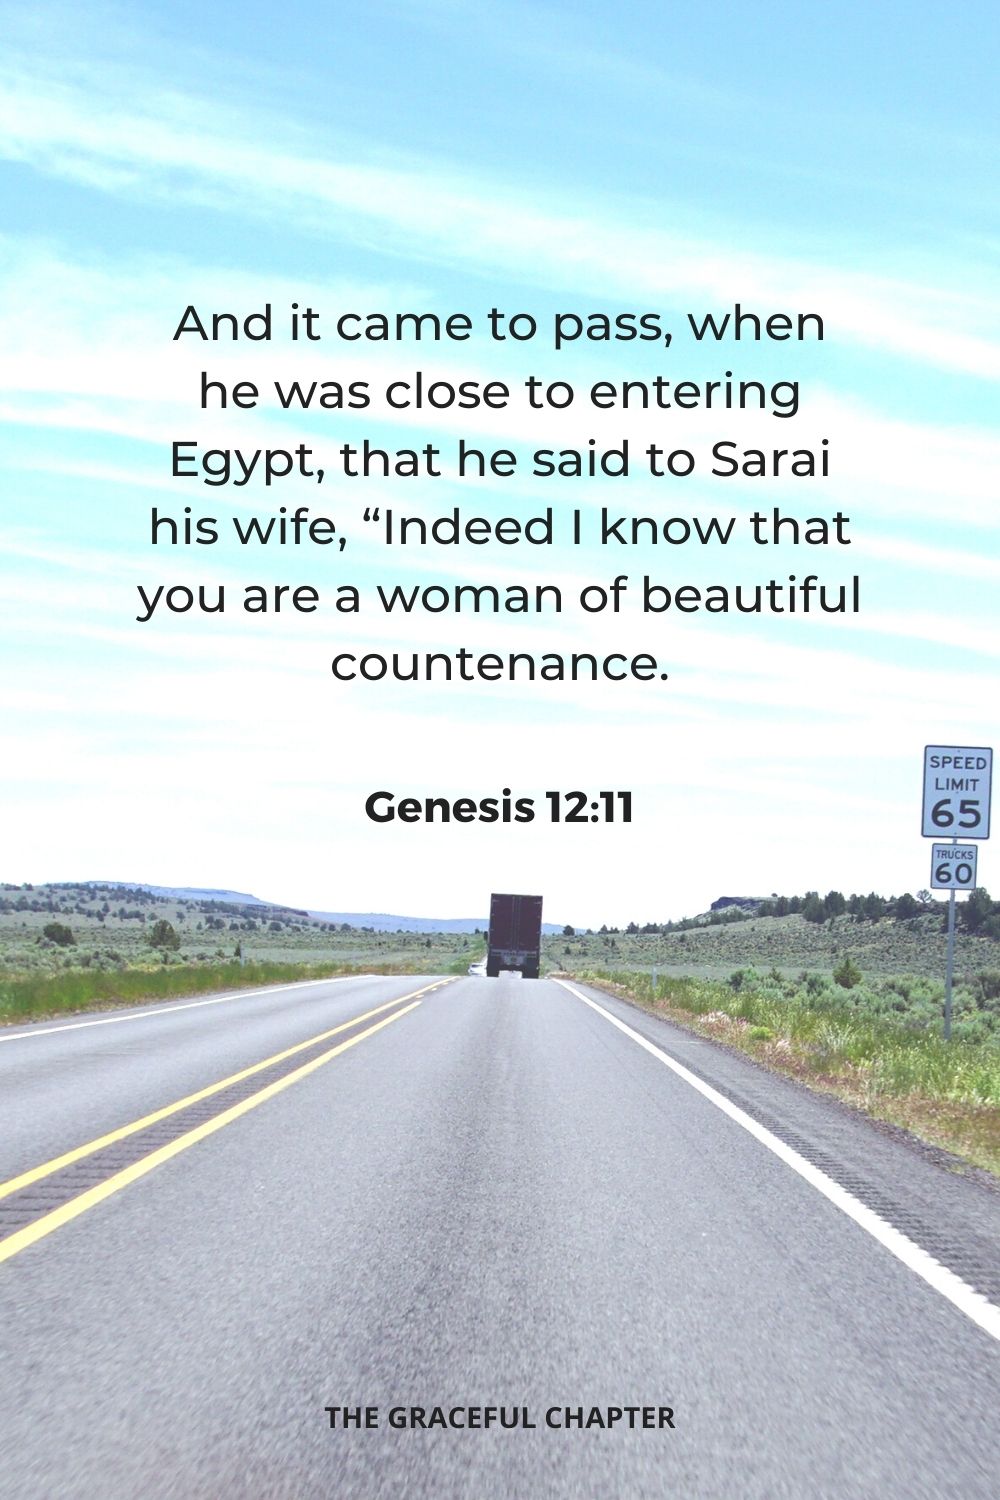 And it came to pass, when he was close to entering Egypt, that he said to Sarai his wife, “Indeed I know that you are a woman of beautiful countenance.